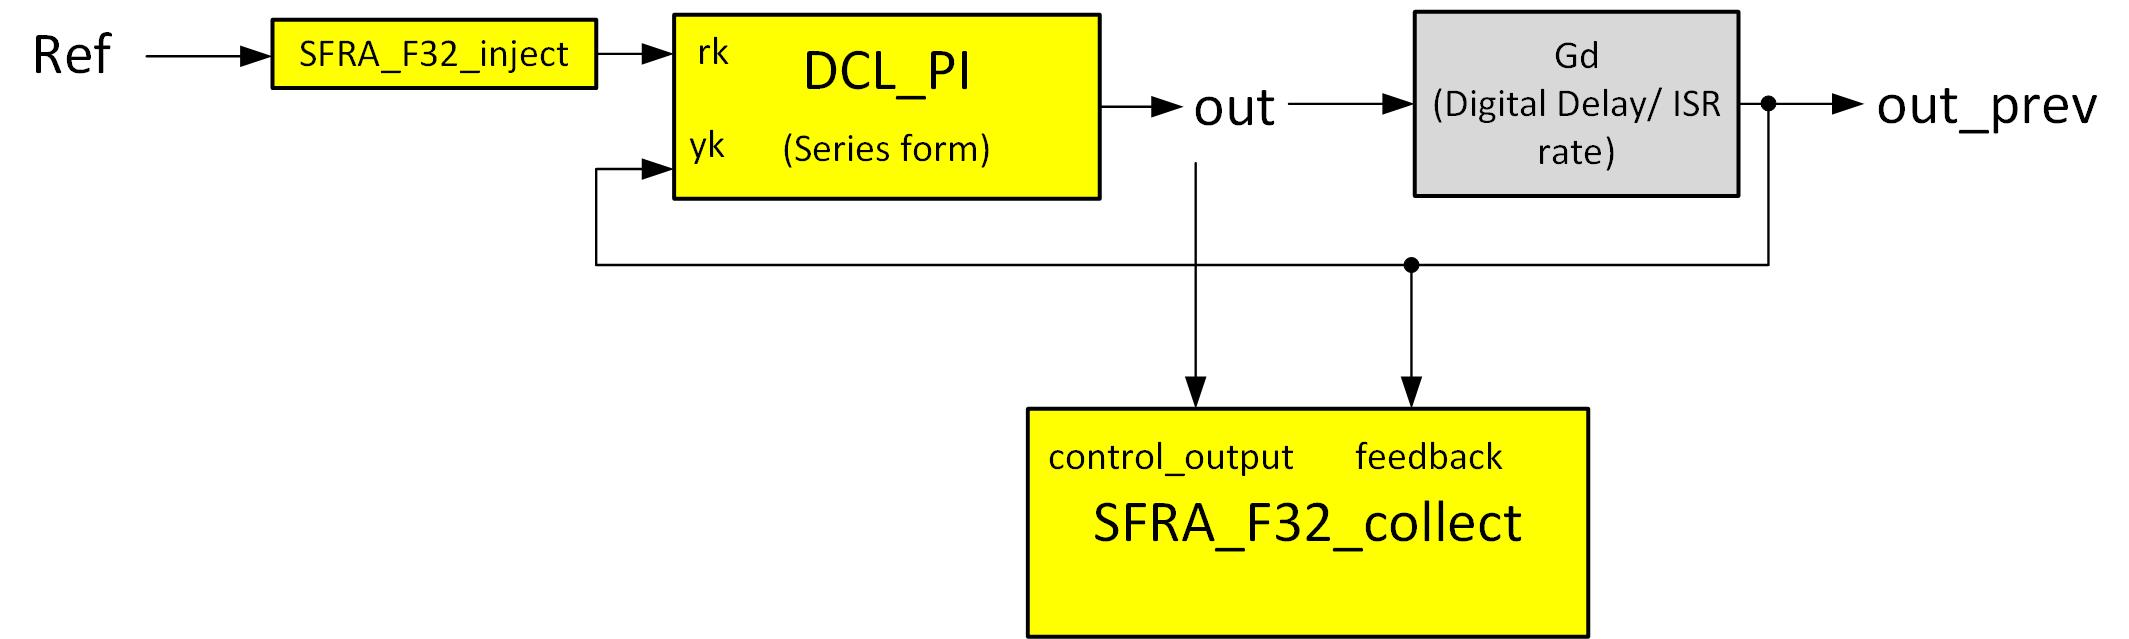 STB_software_diagram.png